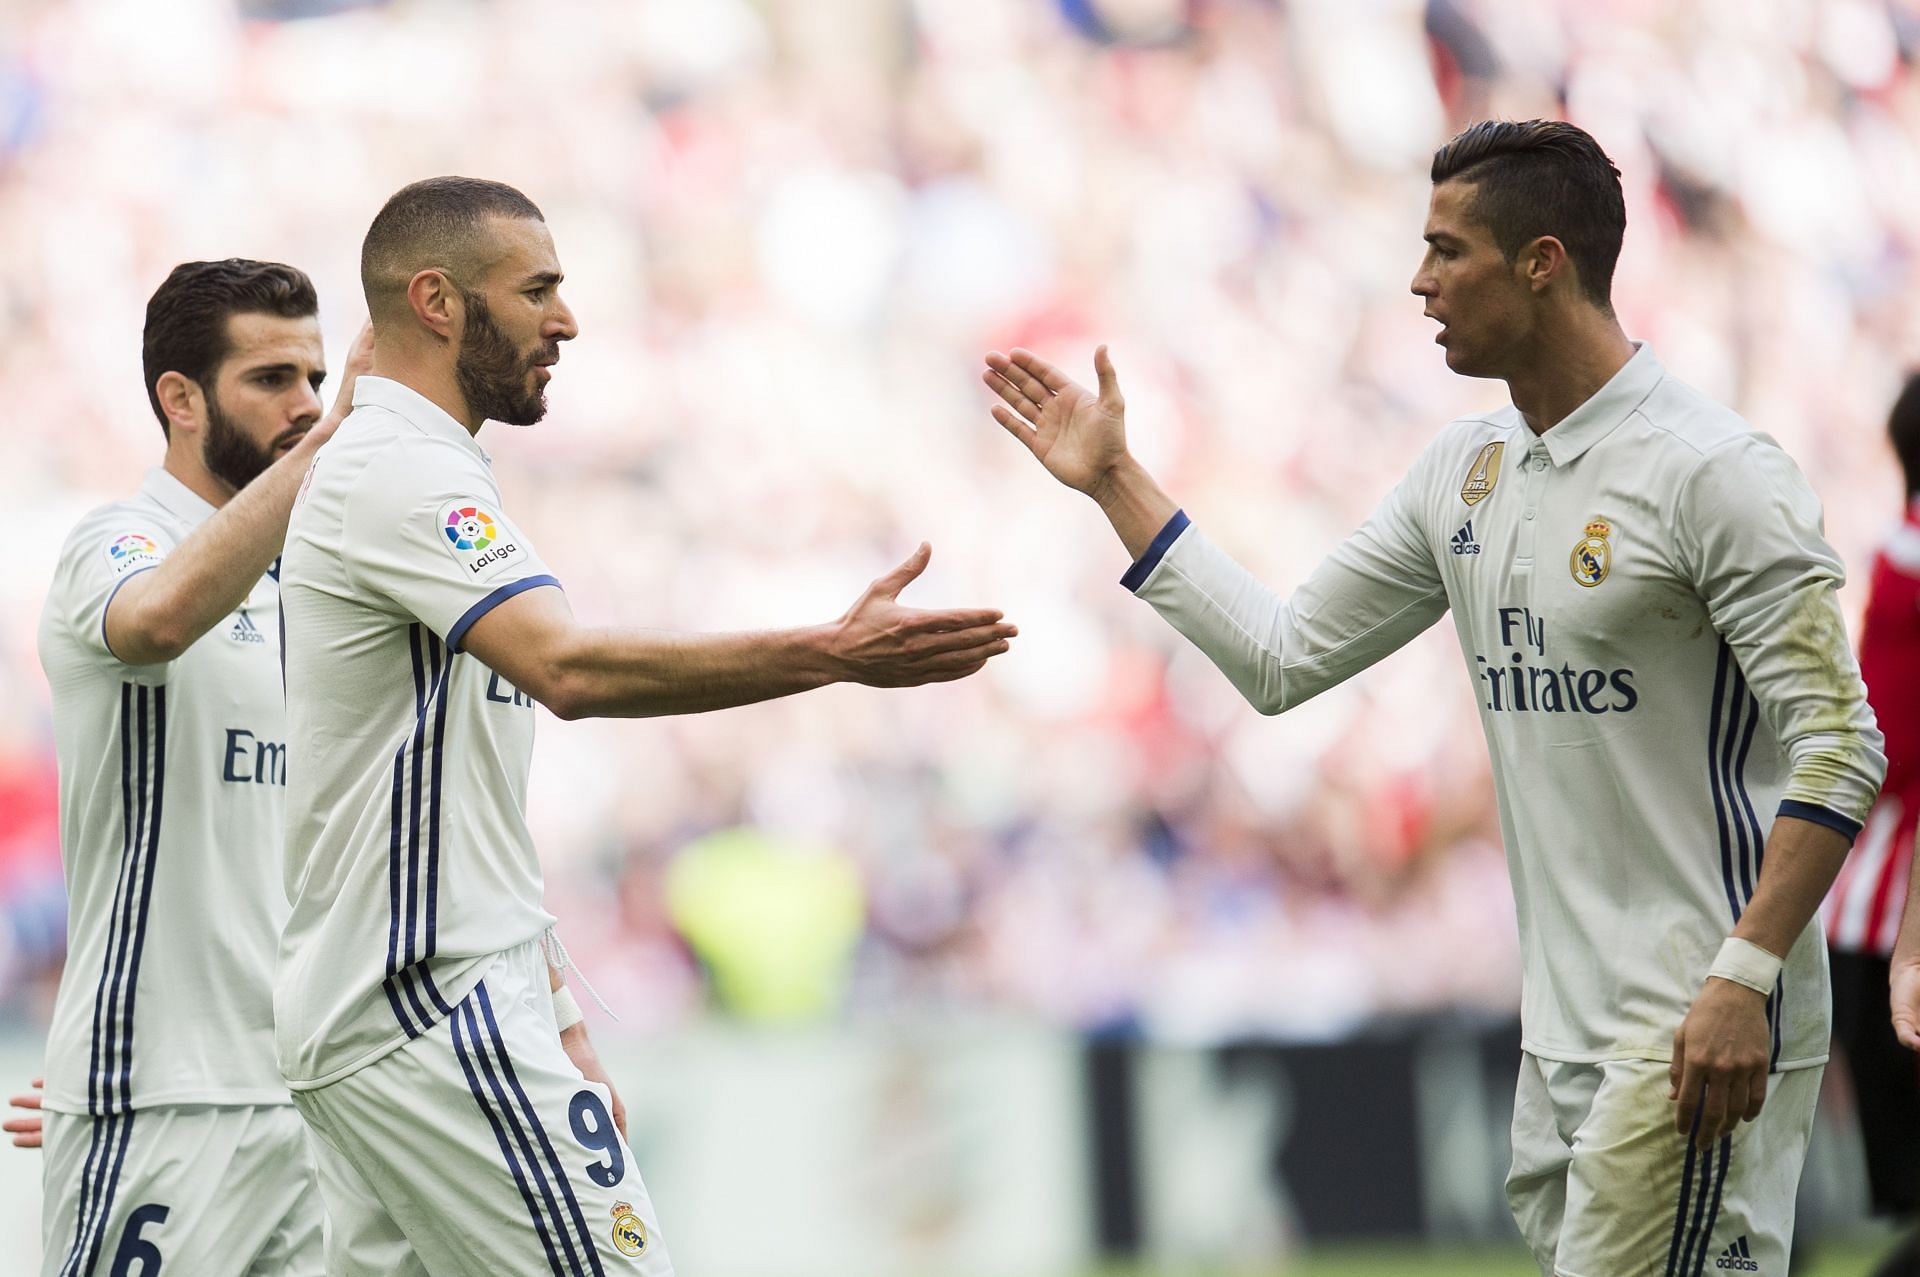 Cristiano Ronaldo and Karim Benzema spent nine successful years together at Real Madrid